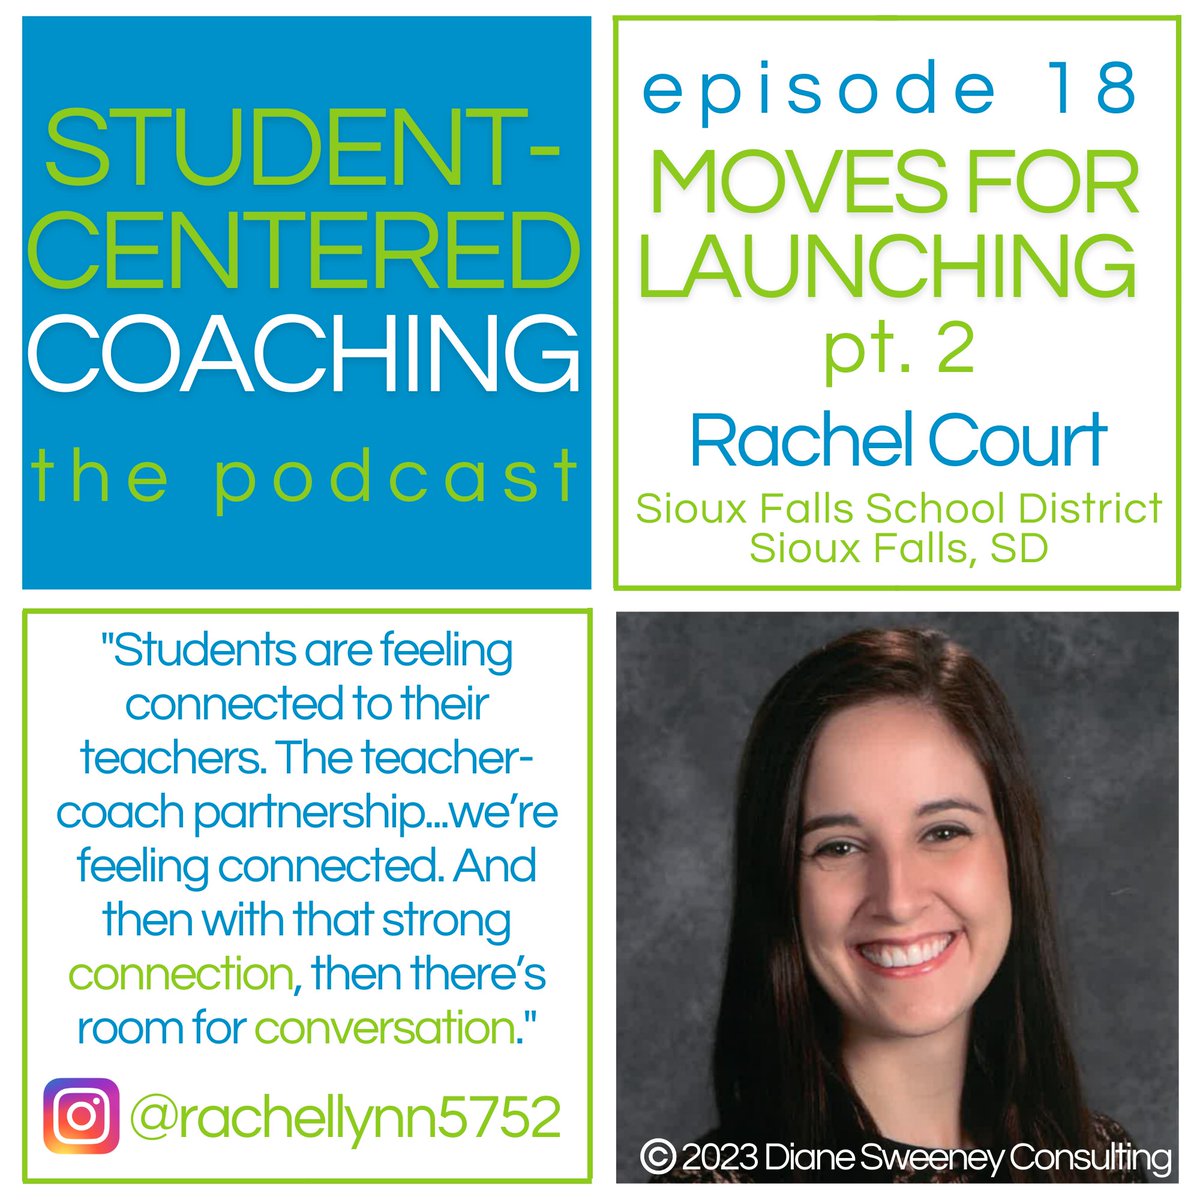 We're back!!! Ep. 18 is a follow-up from last May. @SweeneyDiane challenged. Coaches from @SFSchools accepted. Hope you enjoy! @BrandonWLewis #SCCoaching #EDUcoach #podcastedu …enteredcoachingthepodcast.podbean.com